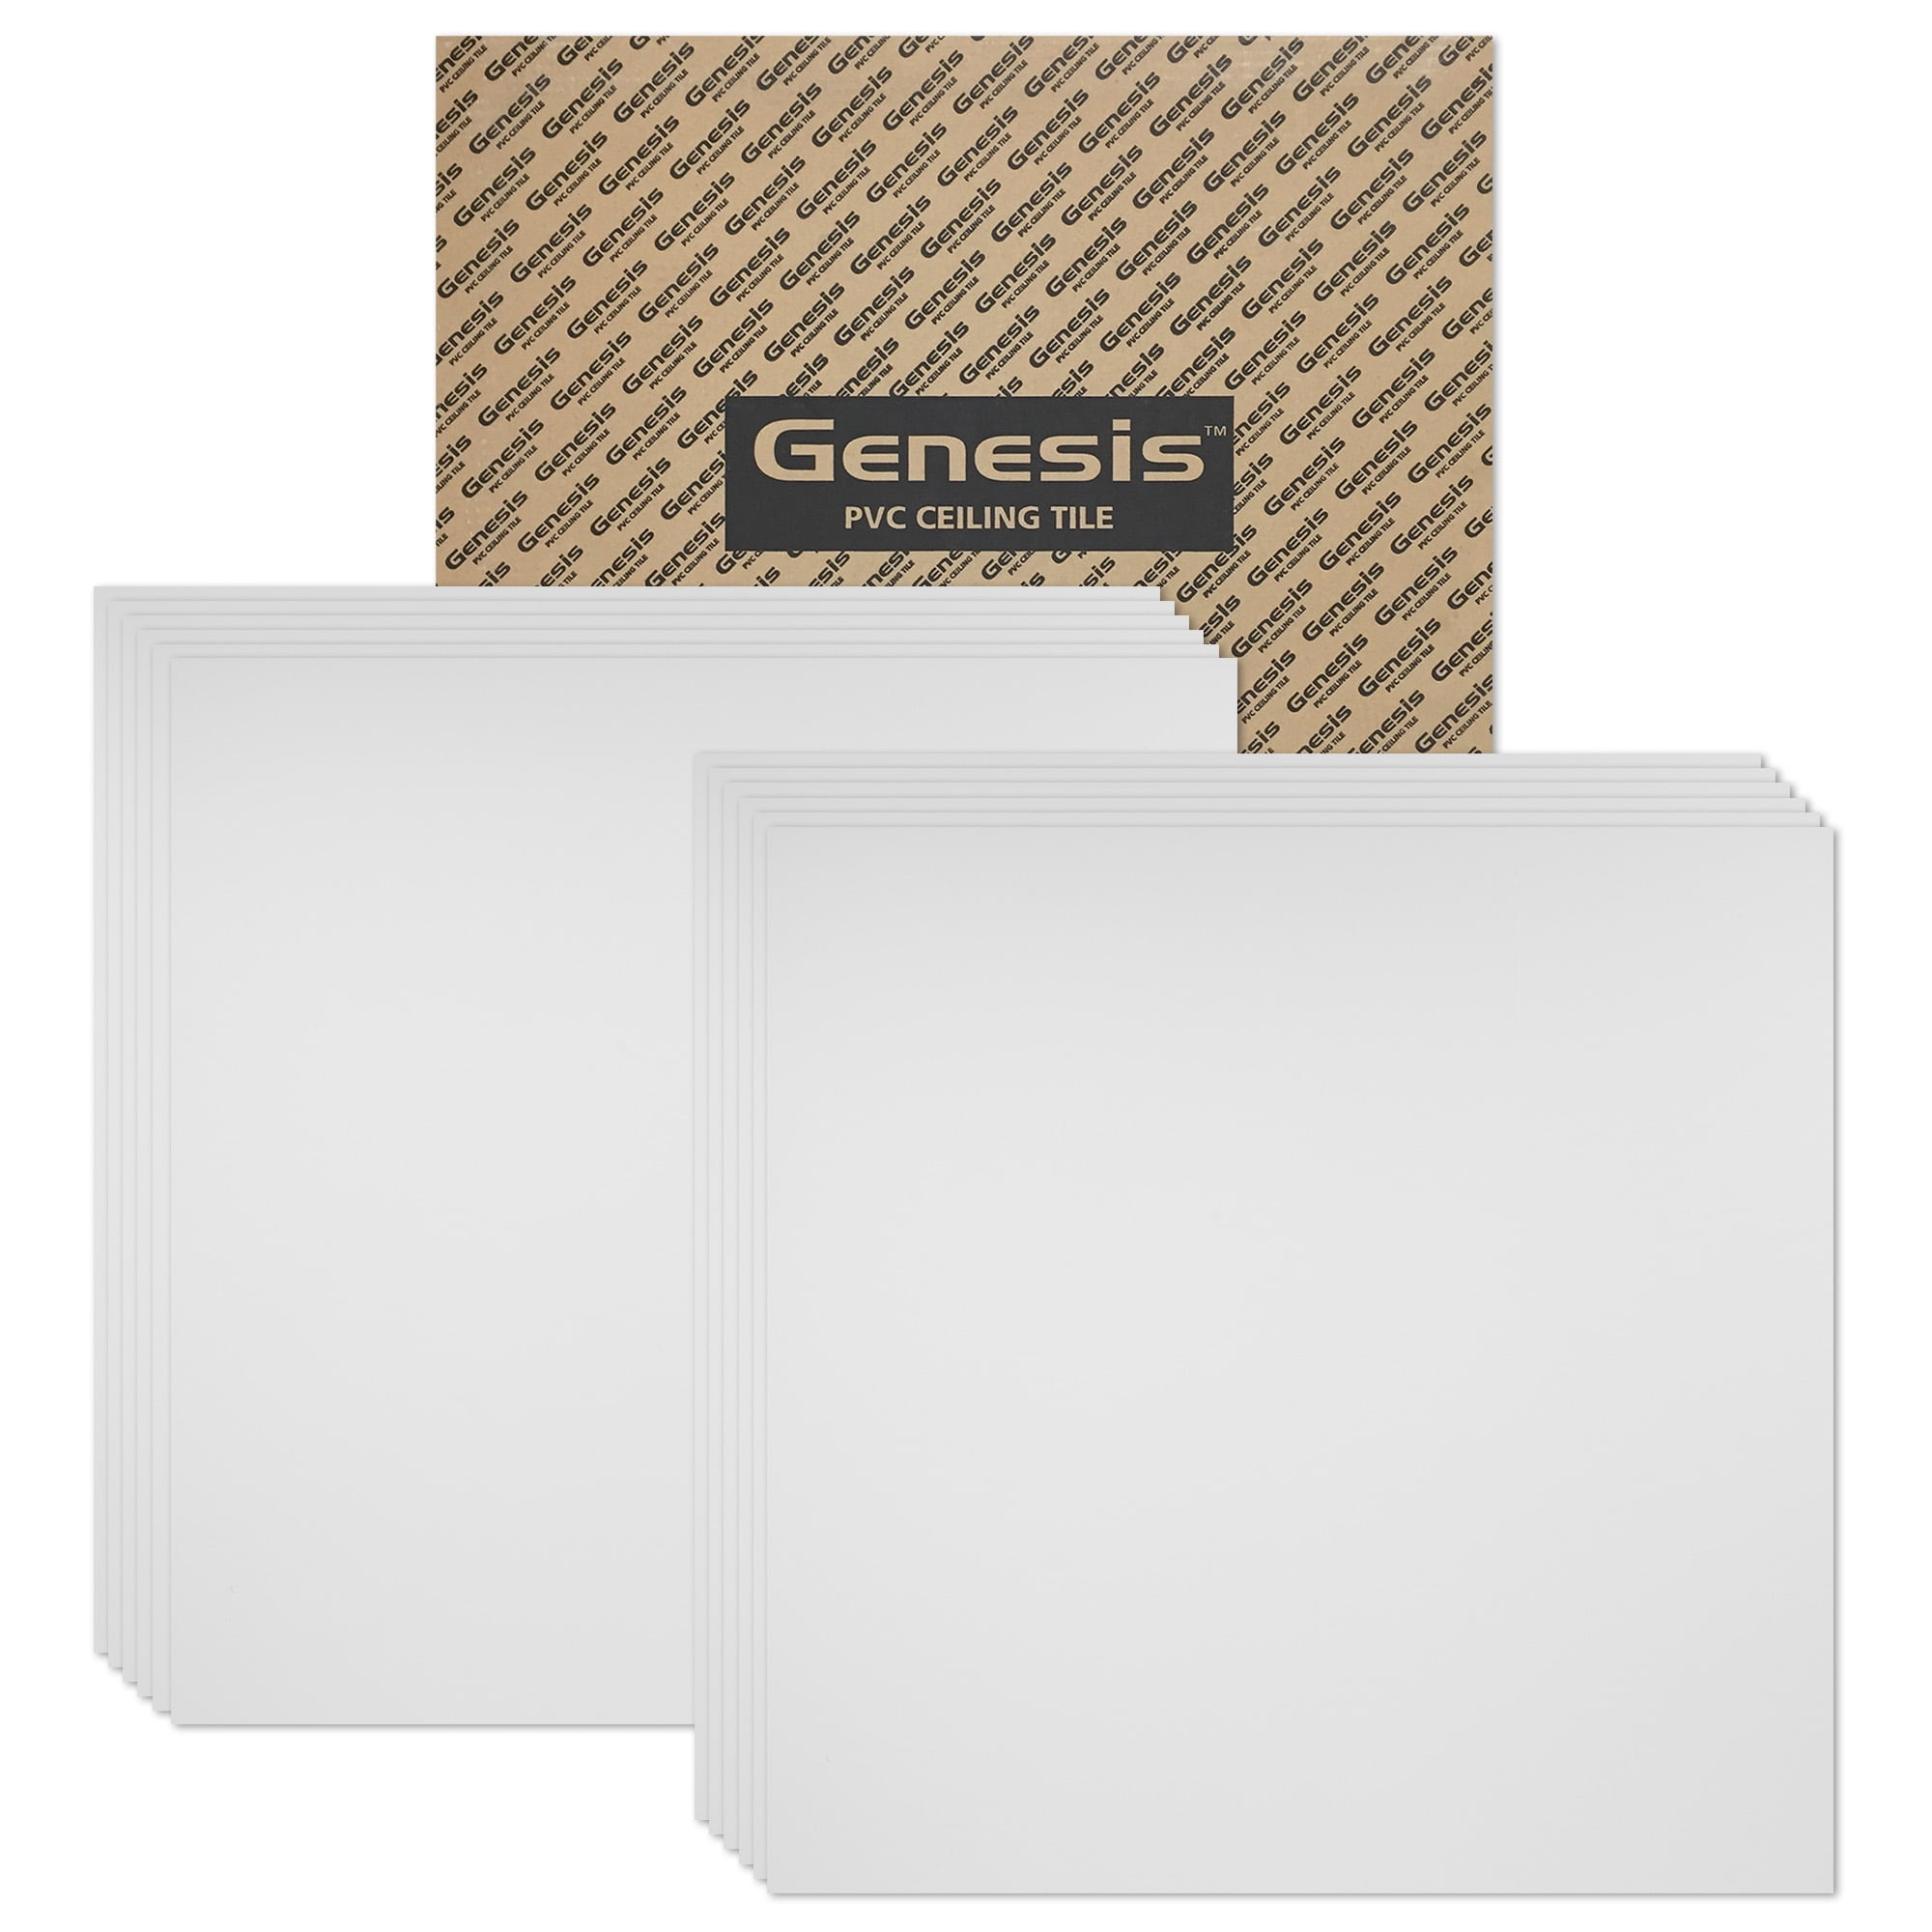 Genesis 2ft X 2ft White Smooth Pro Ceiling Tiles Easy Drop In